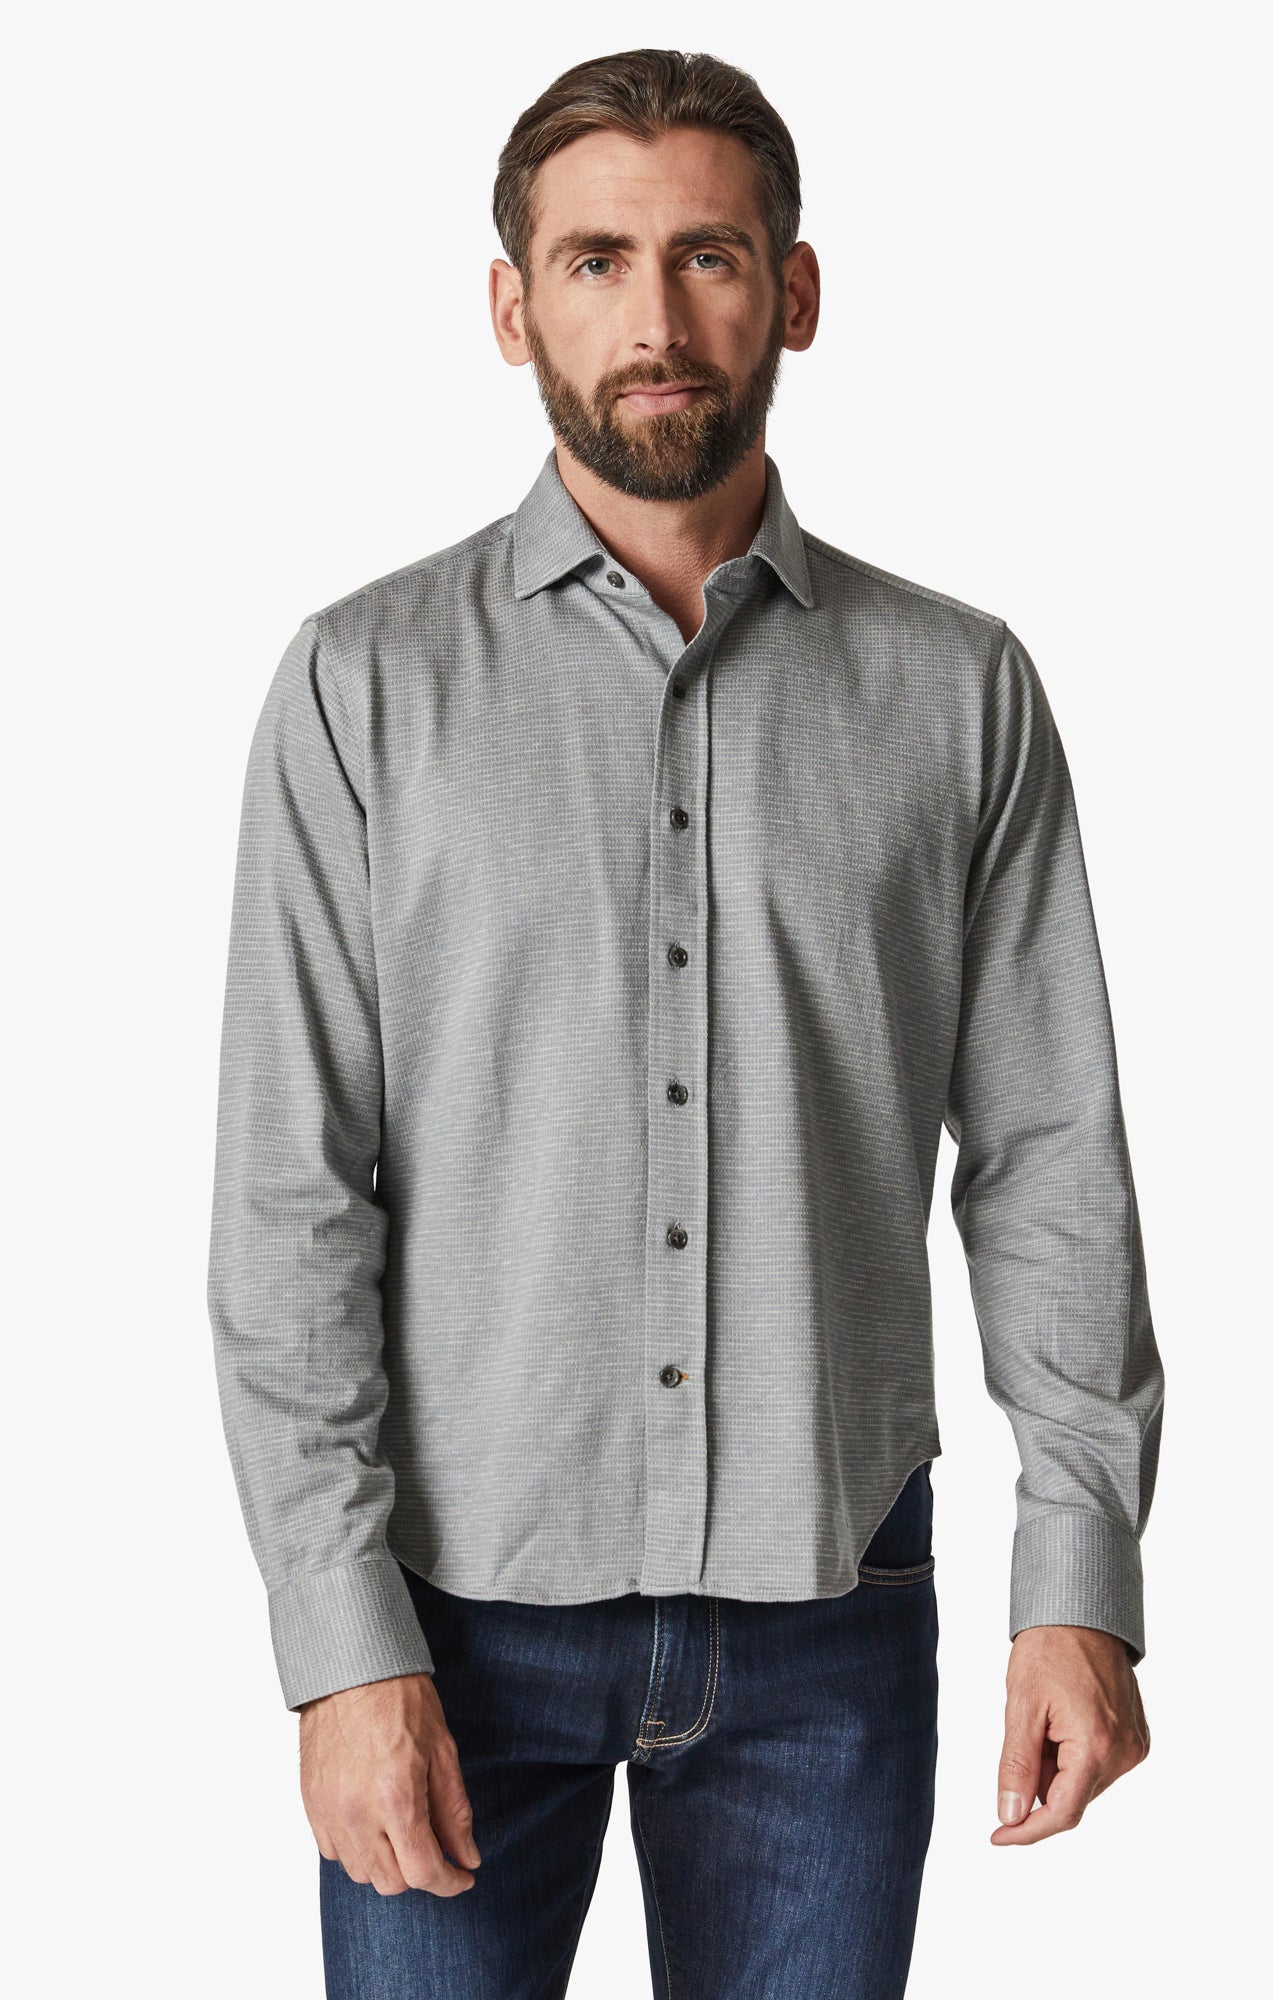 Structured Shirt In Light Grey Image 1